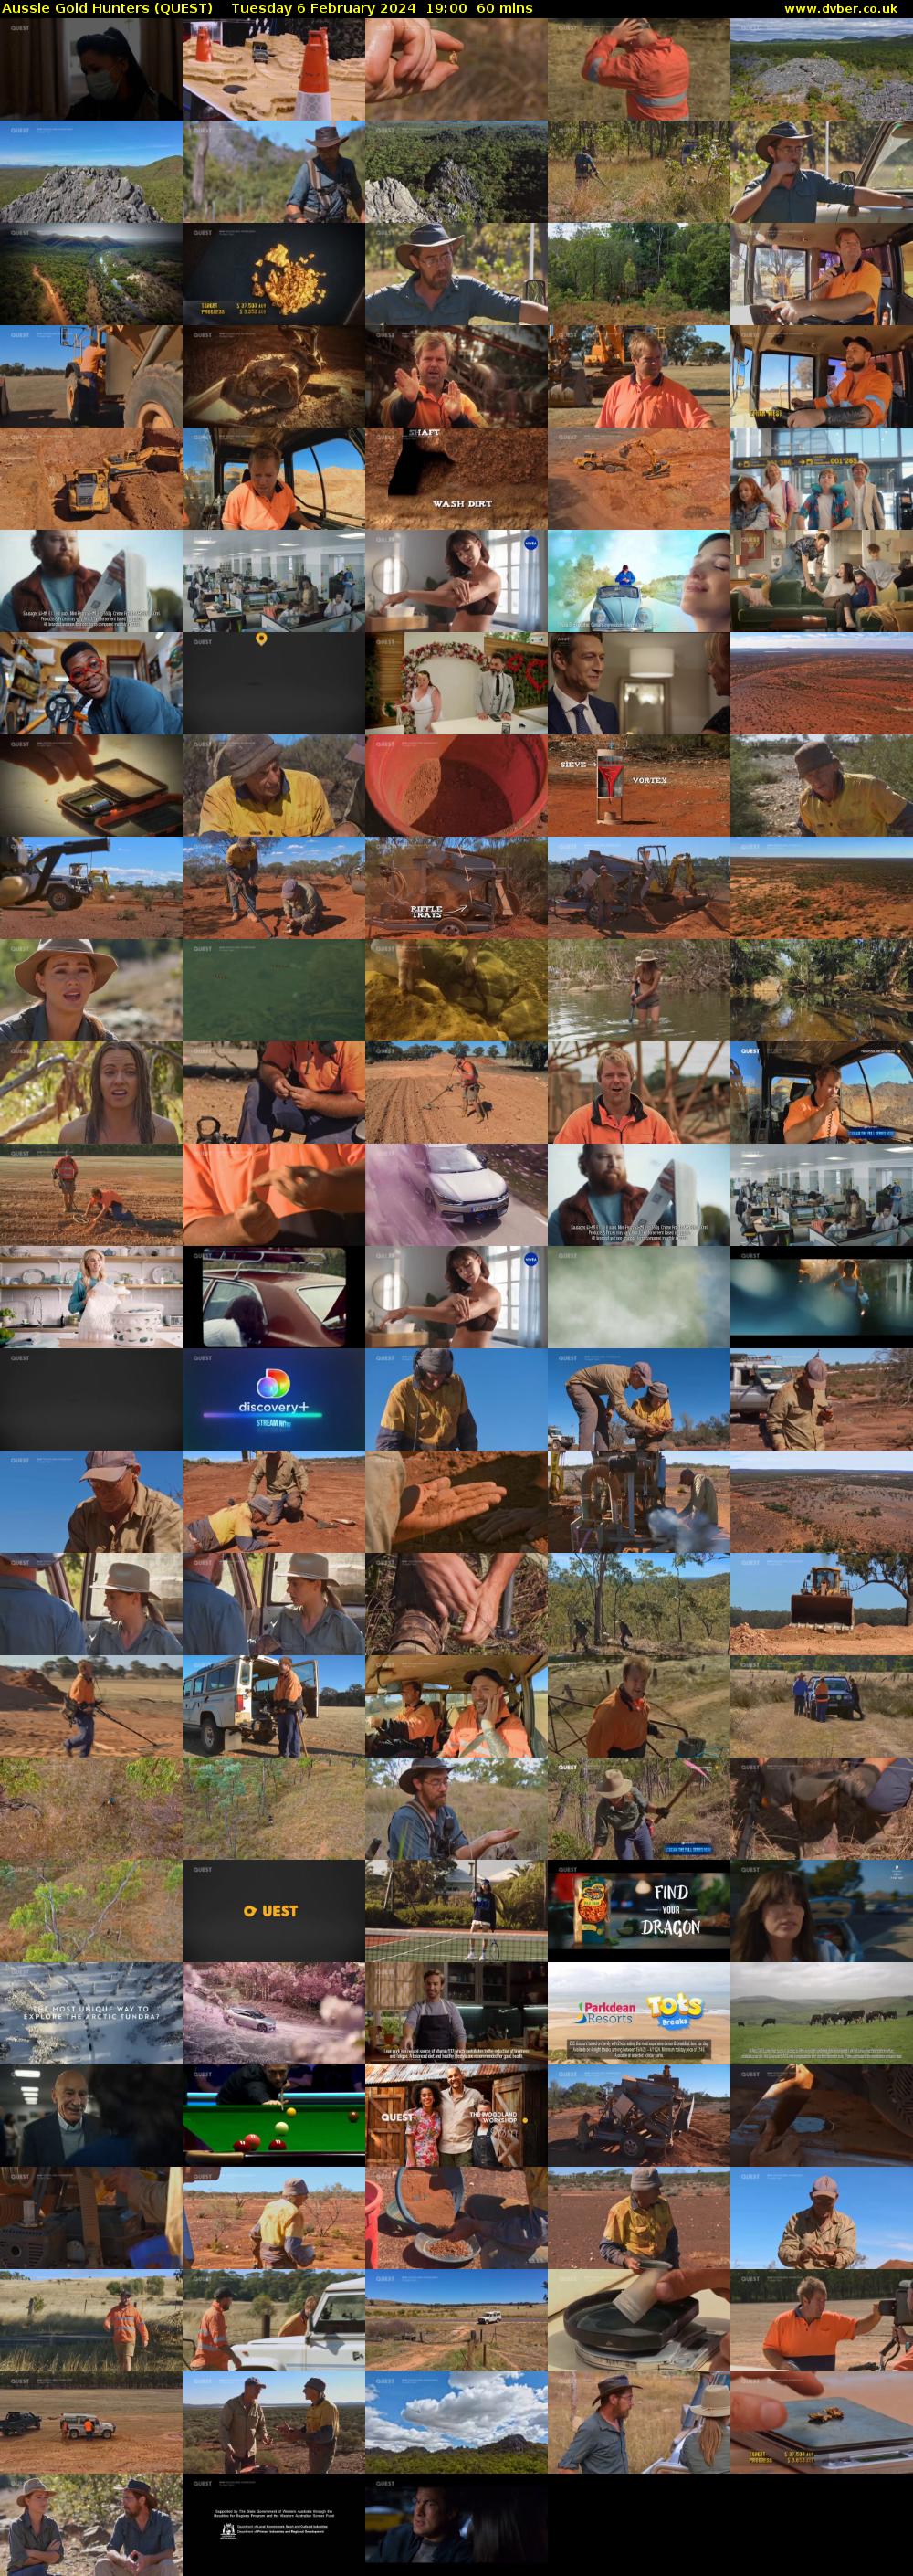 Aussie Gold Hunters (QUEST) Tuesday 6 February 2024 19:00 - 20:00